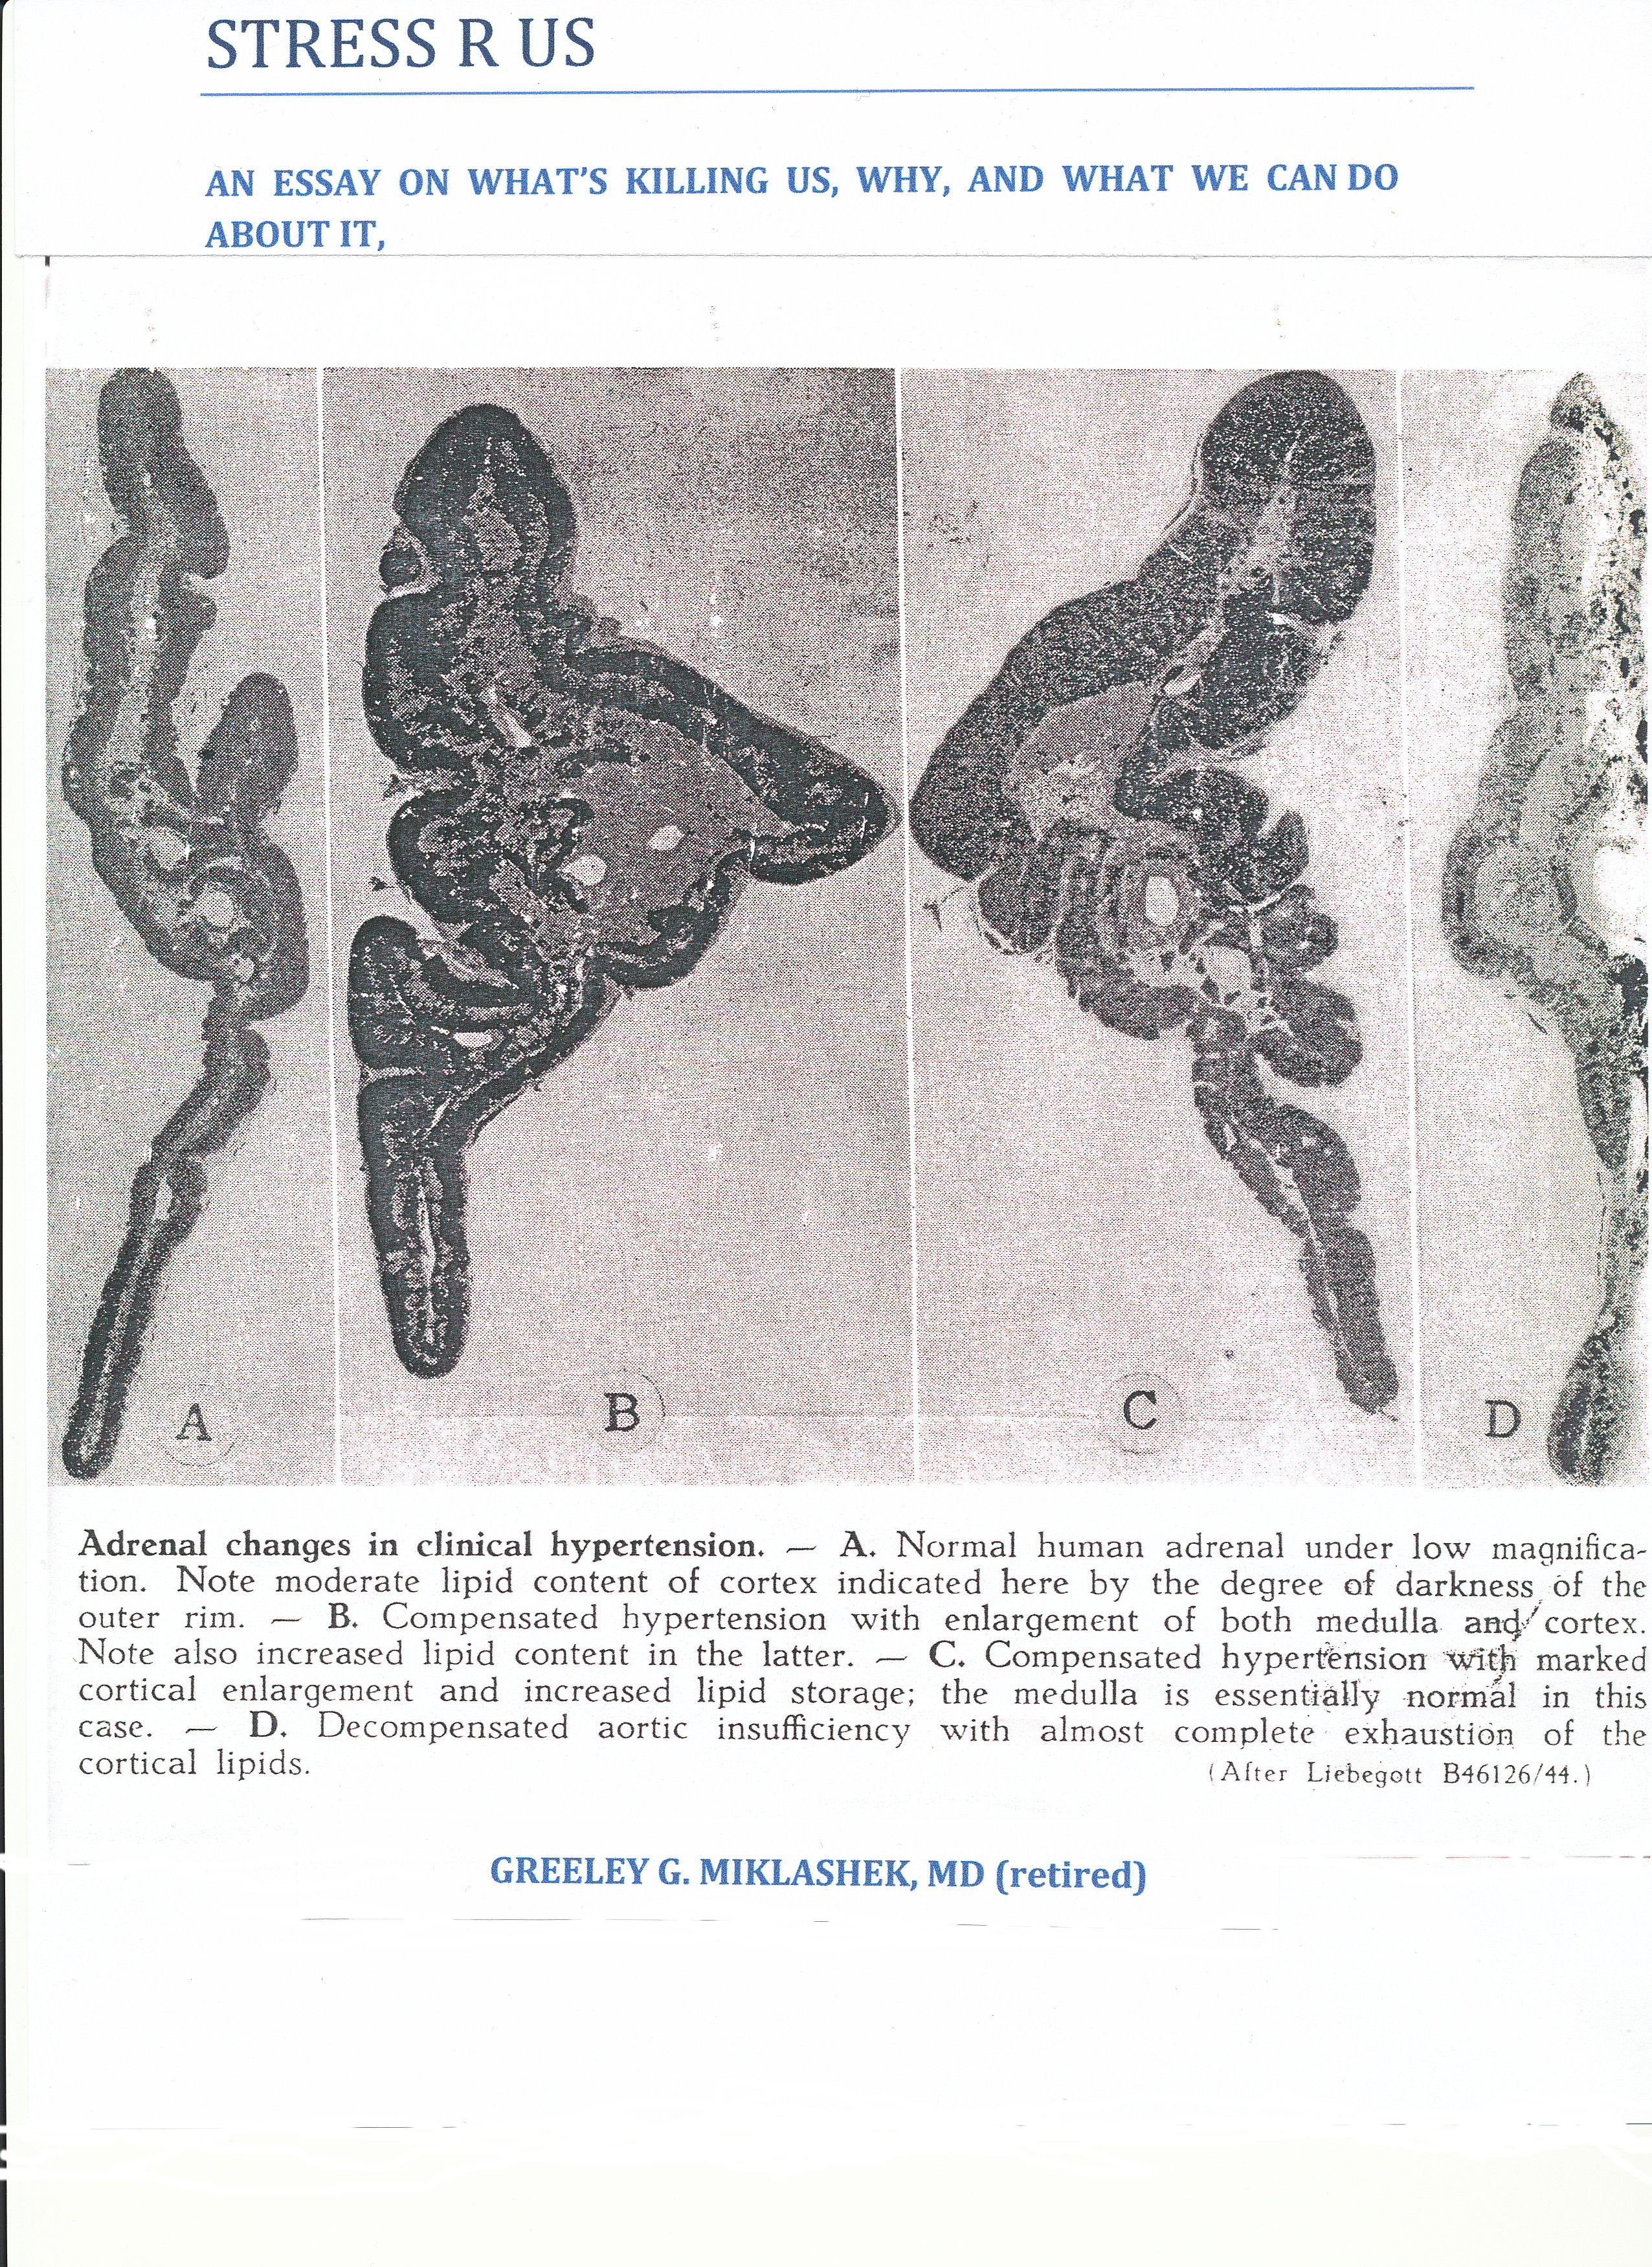 Front cover of "Stress R Us" demonstrating over-active adrenal glands leading to adrenal failure